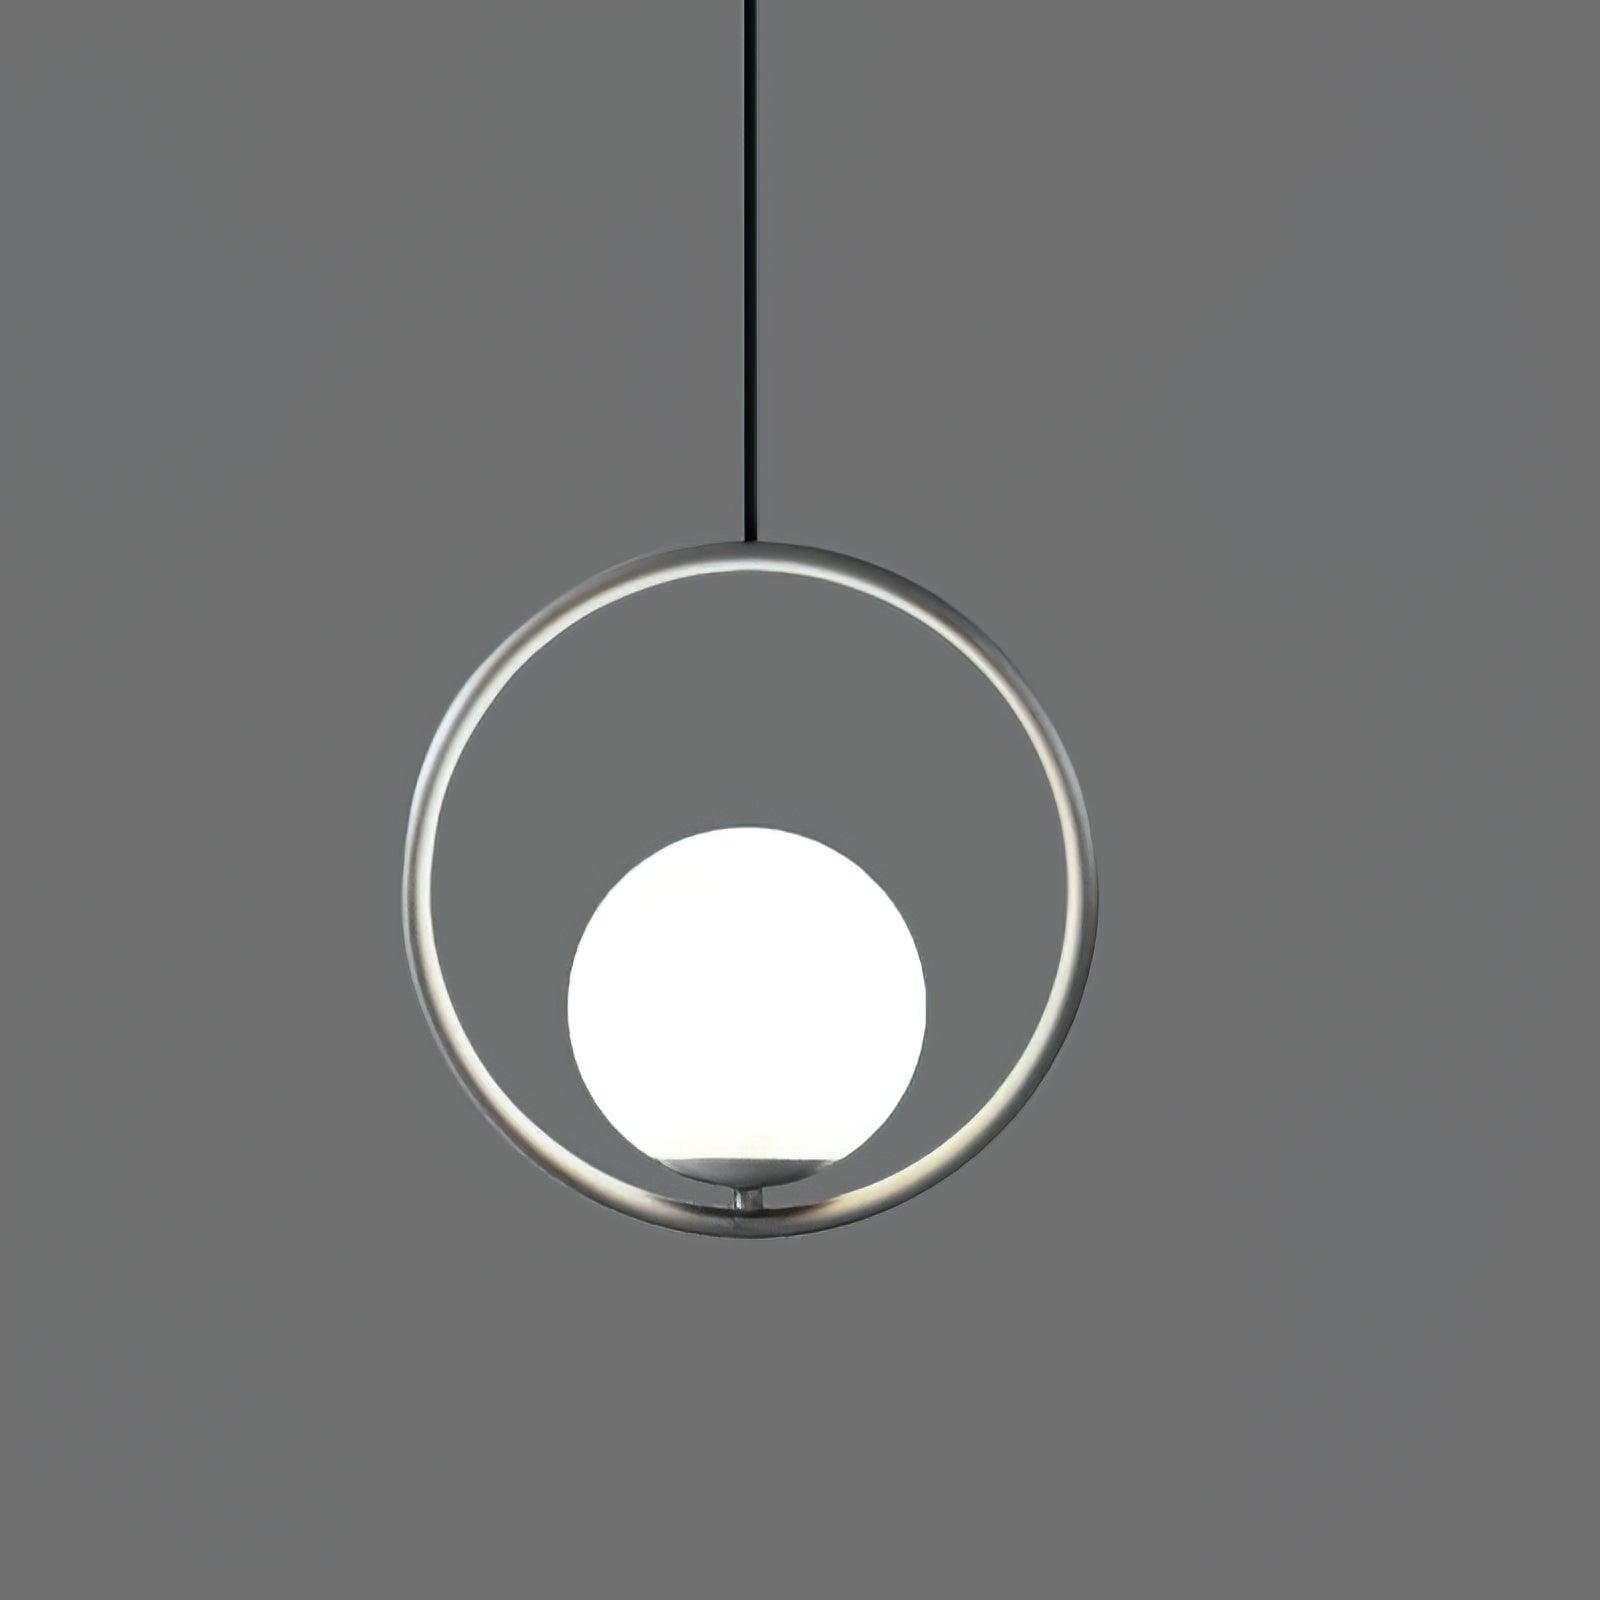 Mila Brass Pendant Light in Silver with a diameter measuring 13.8 inches (35cm).